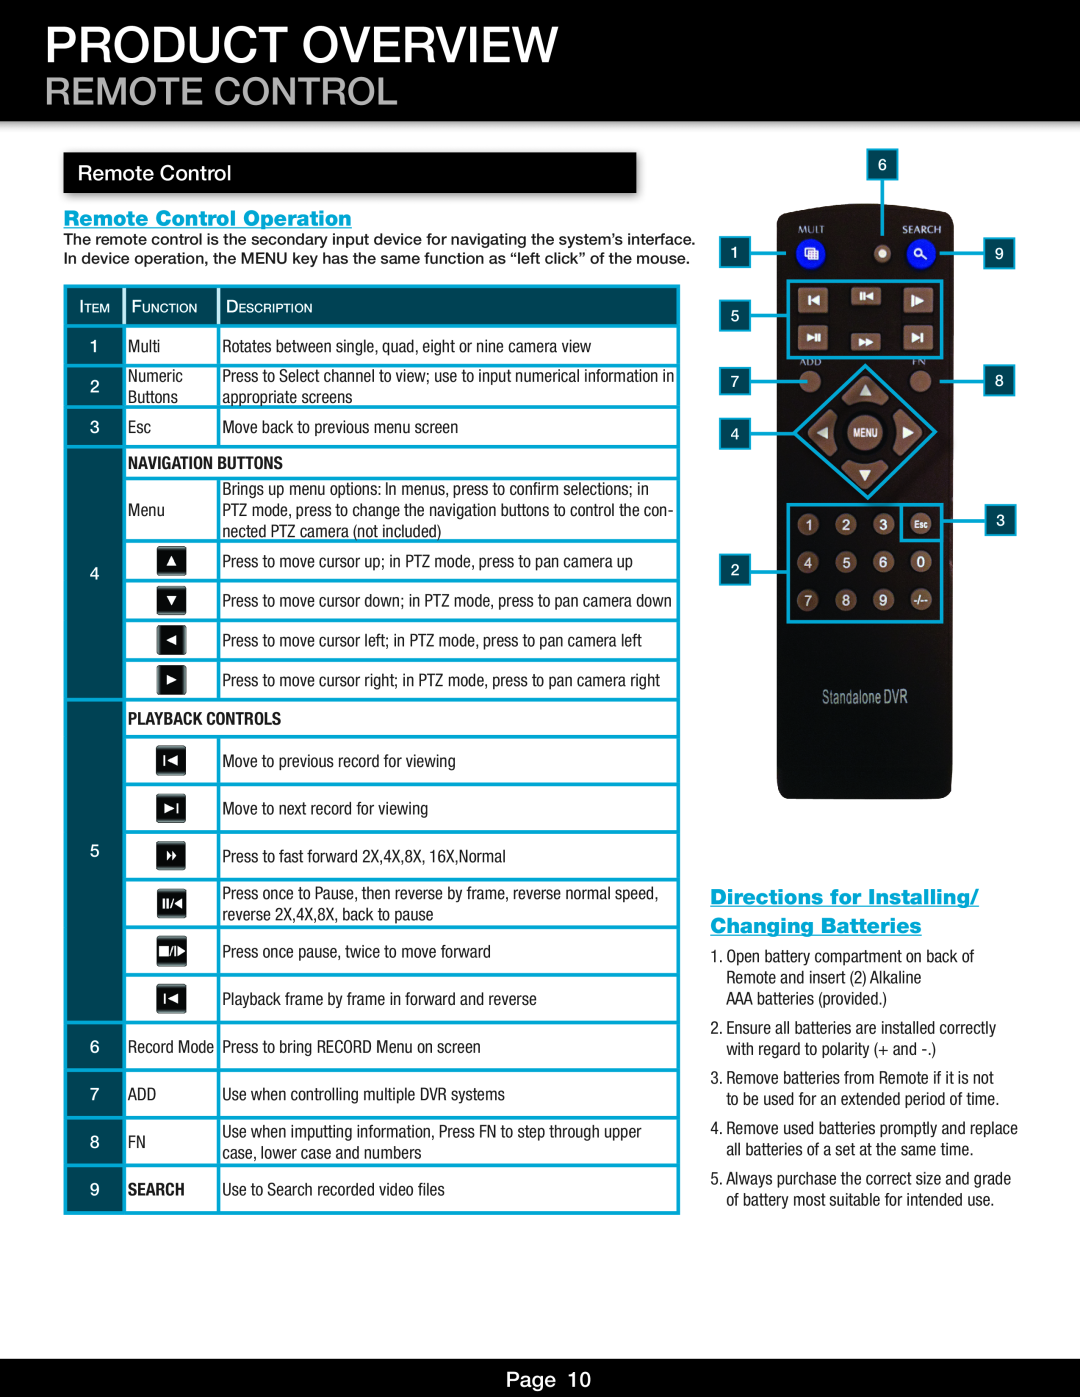 First Alert DVR0805 Product Overview, Remote Control Operation, Directions for Installing/ Changing Batteries, Page 